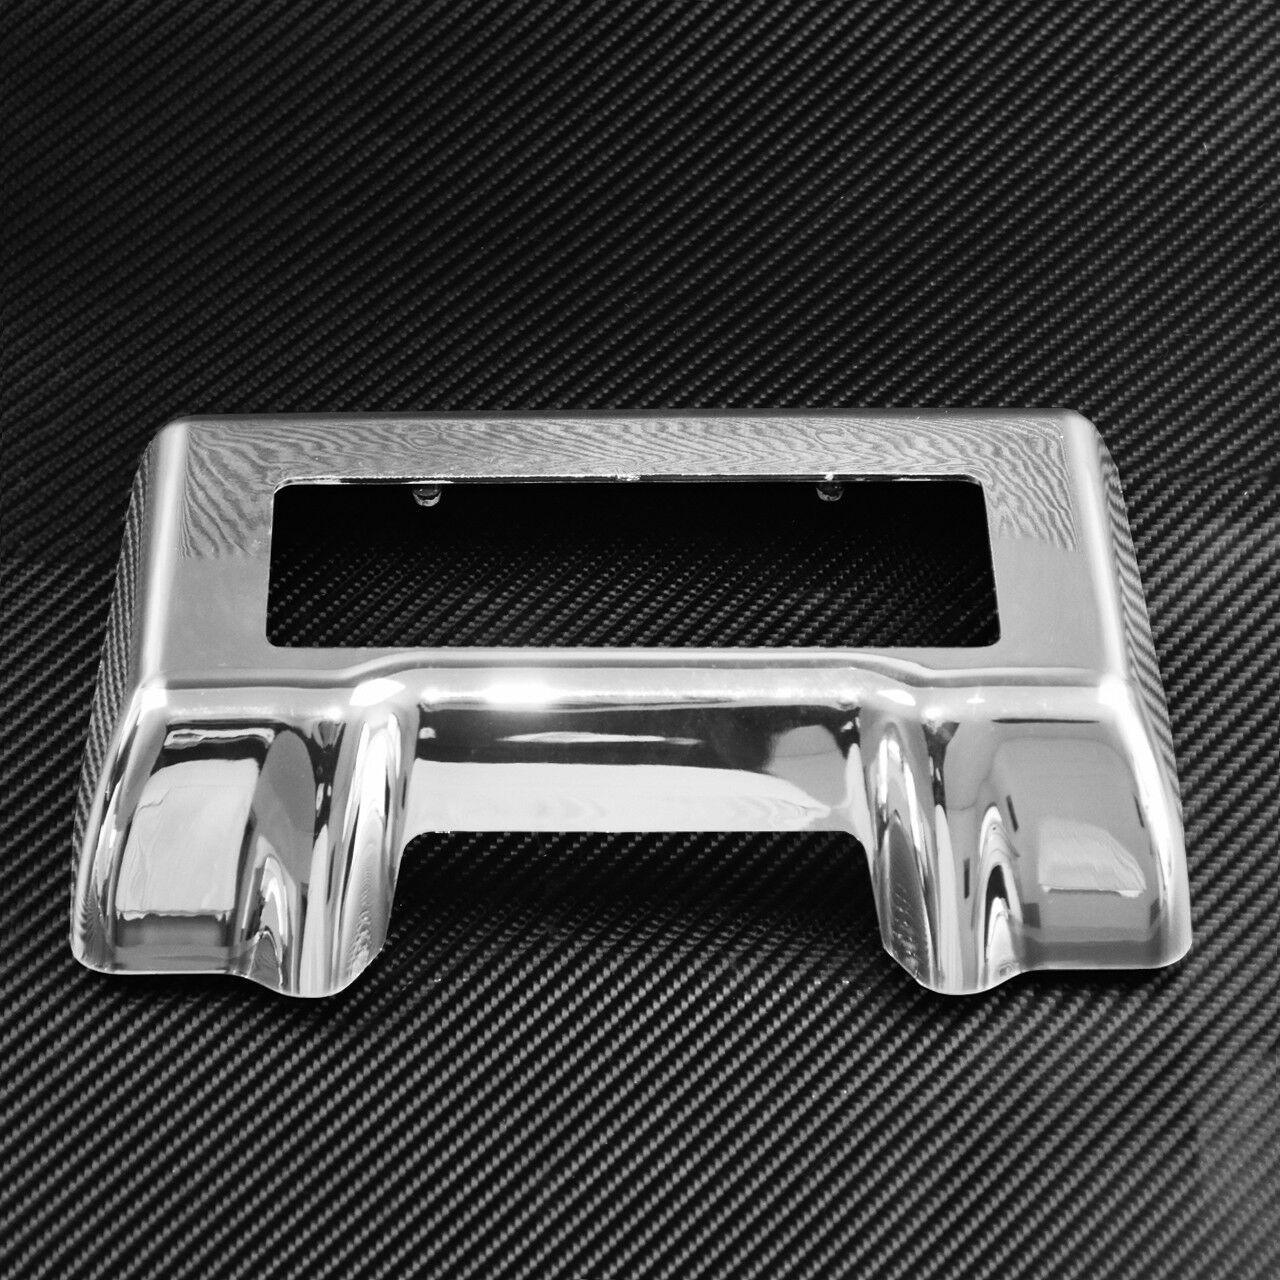 Chrome Oil Cooler Cover Fit For Harley Touring Electra Road Street Glide 2011-16 - Moto Life Products